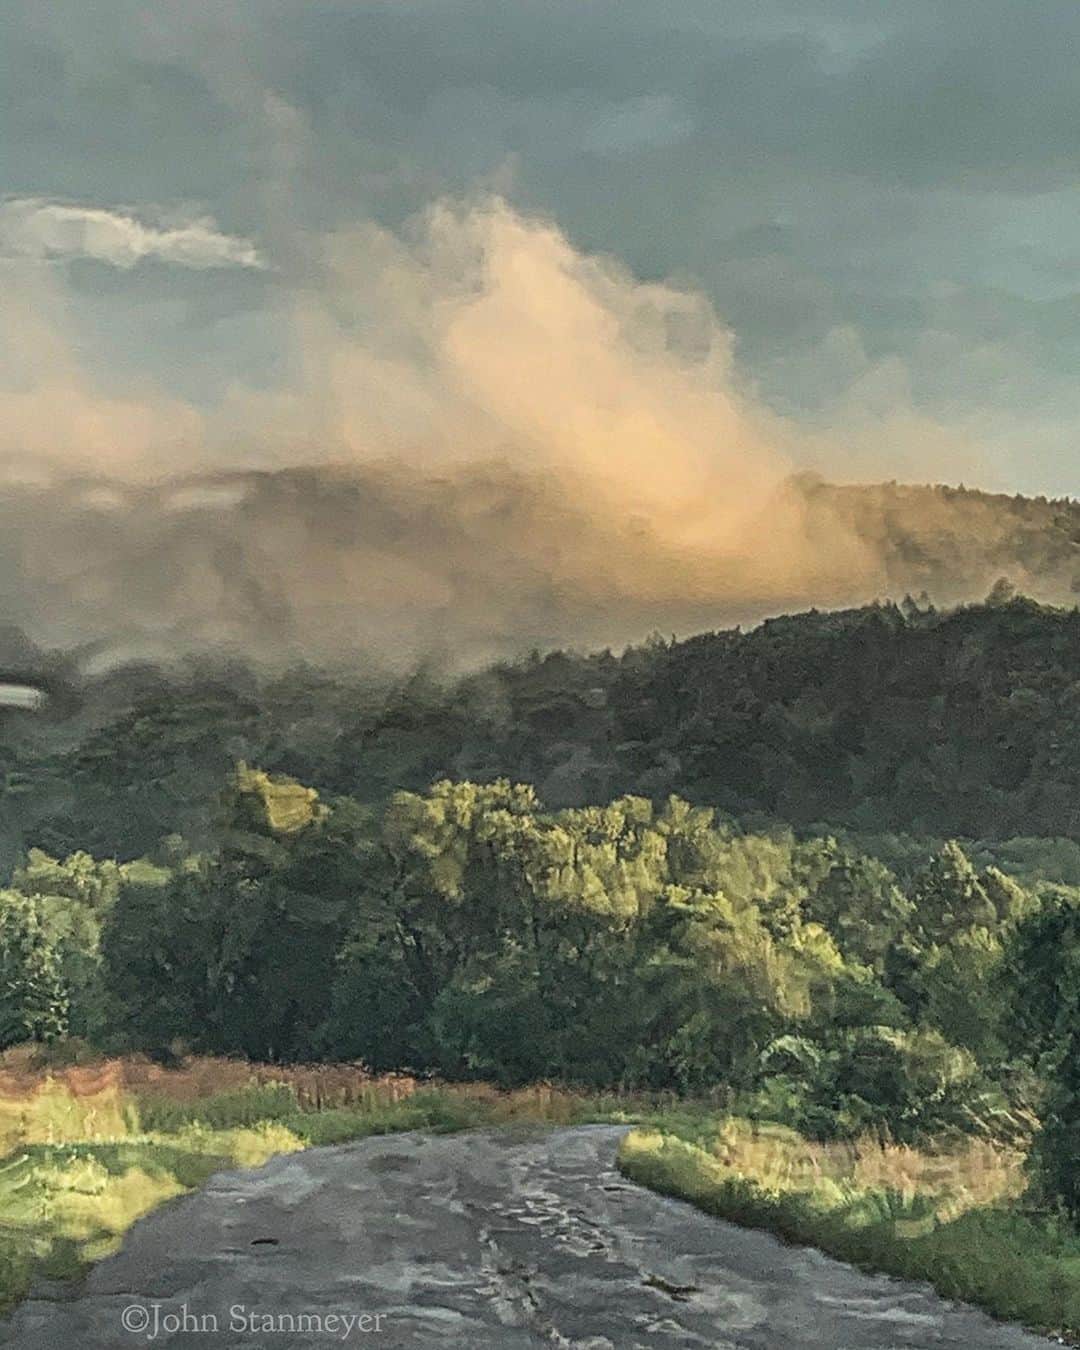 ジョン・スタンメイヤーさんのインスタグラム写真 - (ジョン・スタンメイヤーInstagram)「Photo 1: Tyringham, Massachusetts. Photo 2: Mato Grosso, Brazil - This early evening I was driving home through Tyringham, Massachusetts, when a most beautiful rain came. Almost quickly as it had begun, it ended. A warm shaft of sunlight appeared that lit a hill with a cloud of thick fog that briefly passed before my dripping wet windshield...felt I was driving through a painting. I began to feel sad, then sick. The cloud of fog resembled smoke from a fire, and I became sadder, deeply disturbed by the reality taking place in Brazil at the very moment I saw such beauty. I published this series of prettiness on my IG Stories earlier this evening for a reason...to lure us in through what we seek as people; Beauty. Closing with the reality also in occupancy on our earth, recent photos moving across Instagram showing the most extreme levels of the Amazon rainforest burning. The second photograph here I took back in 2008 flying over the Mato Grosso region of Brazil on a story for @natgeo. Those were the worst days of destruction to the lungs of our earth. Today we are ringing our extinction alarm louder than ever...there are 85% more fires in the Amazon than last year. Our leaders have gone mad. Some of us, through greed, have joined their delusion. Making matters worse, there’s a movement on social media with the hashtag, #prayforamazonia. You can pray if you want. Reality...we don’t need “prayers” for the Amazon. We need humanity to hold our politicians, and each of us, accountable for the ruinous actions we are doing to ourselves. - #amazon #burning #environment #earth #amazonablaze #fire #smoke #amazonburning #matogrosso #tyringham #massachusetts #intheberkshires #fog #sun #trees #extinctionalarm」8月22日 13時38分 - johnstanmeyer